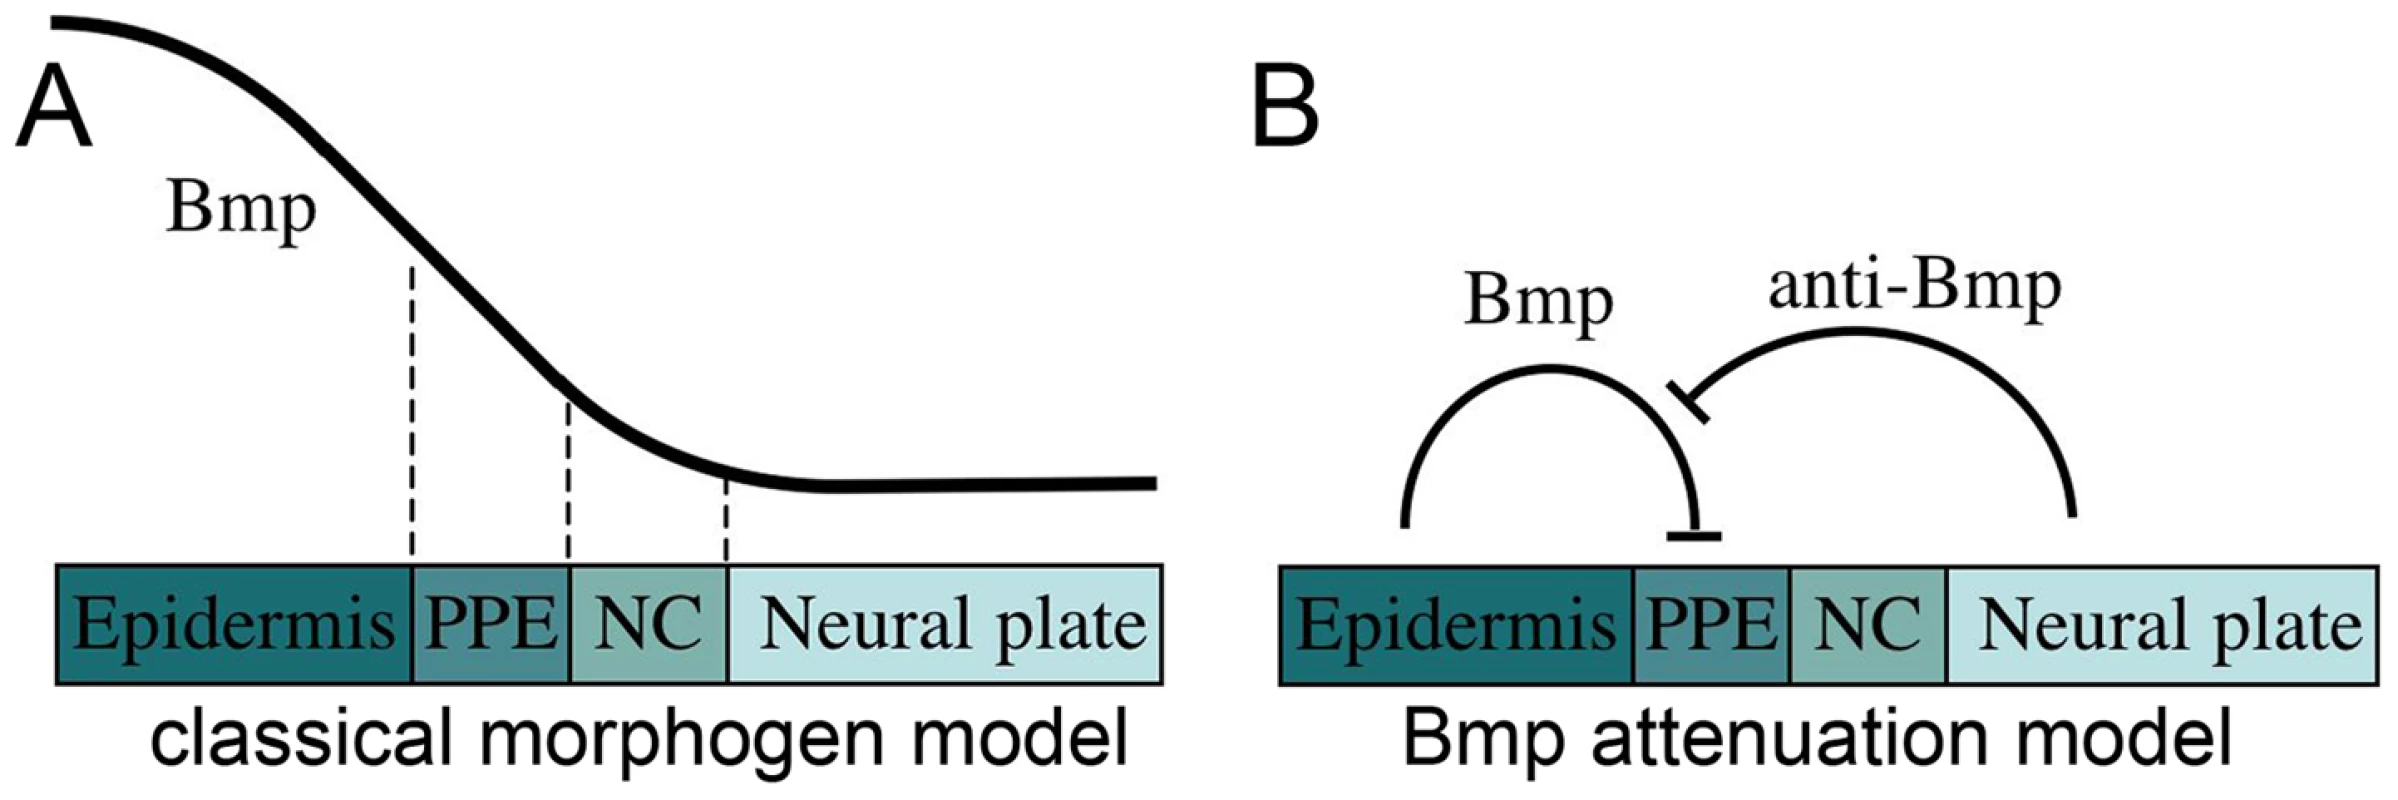 Models for the role of Bmp in preplacodal specification.